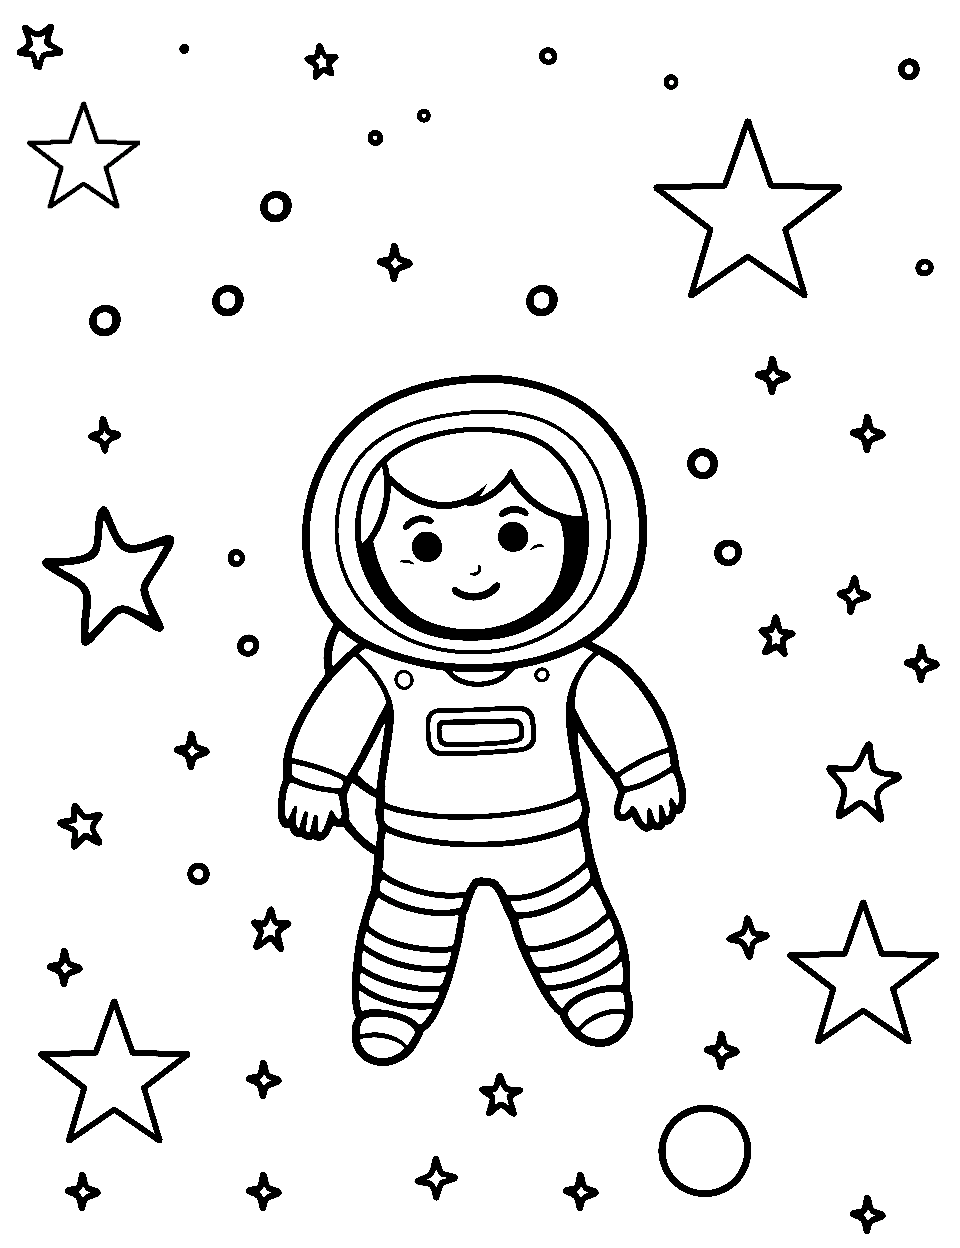 Kindergarten Astronaut Coloring Page - A child astronaut floating in space with stars all around.